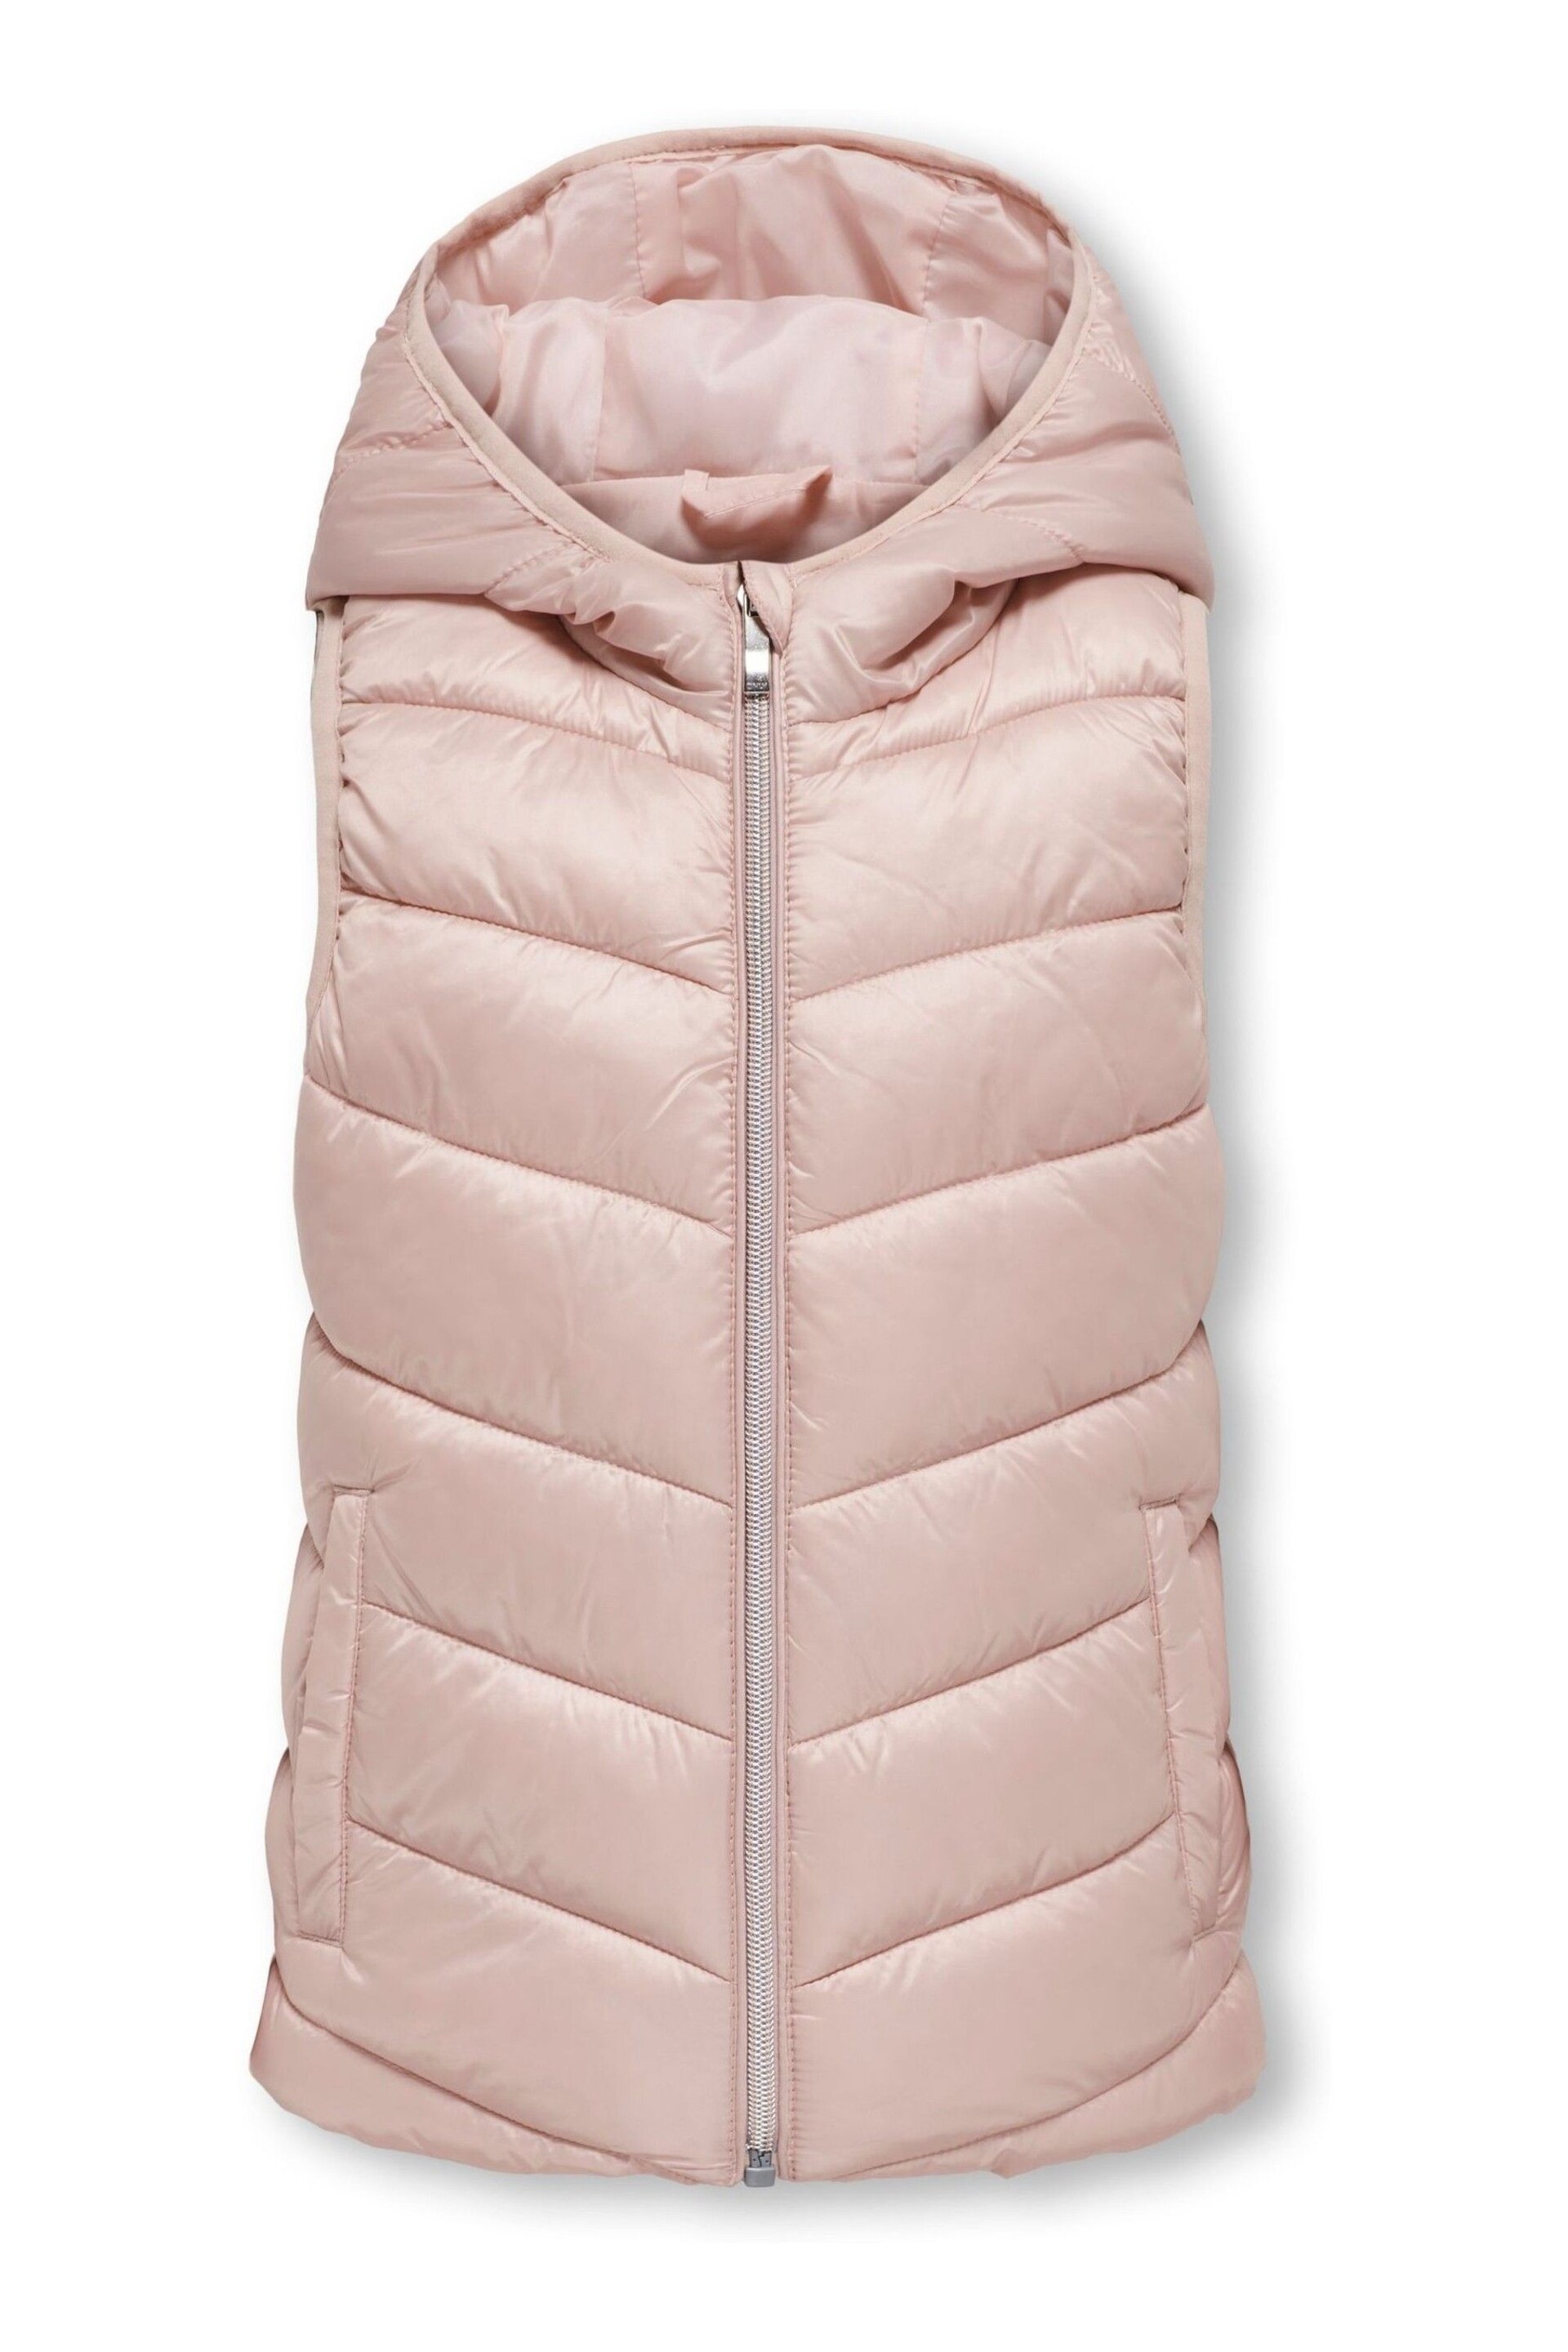 ONLY KIDS Zip Up Hooded Gilet - Image 1 of 2